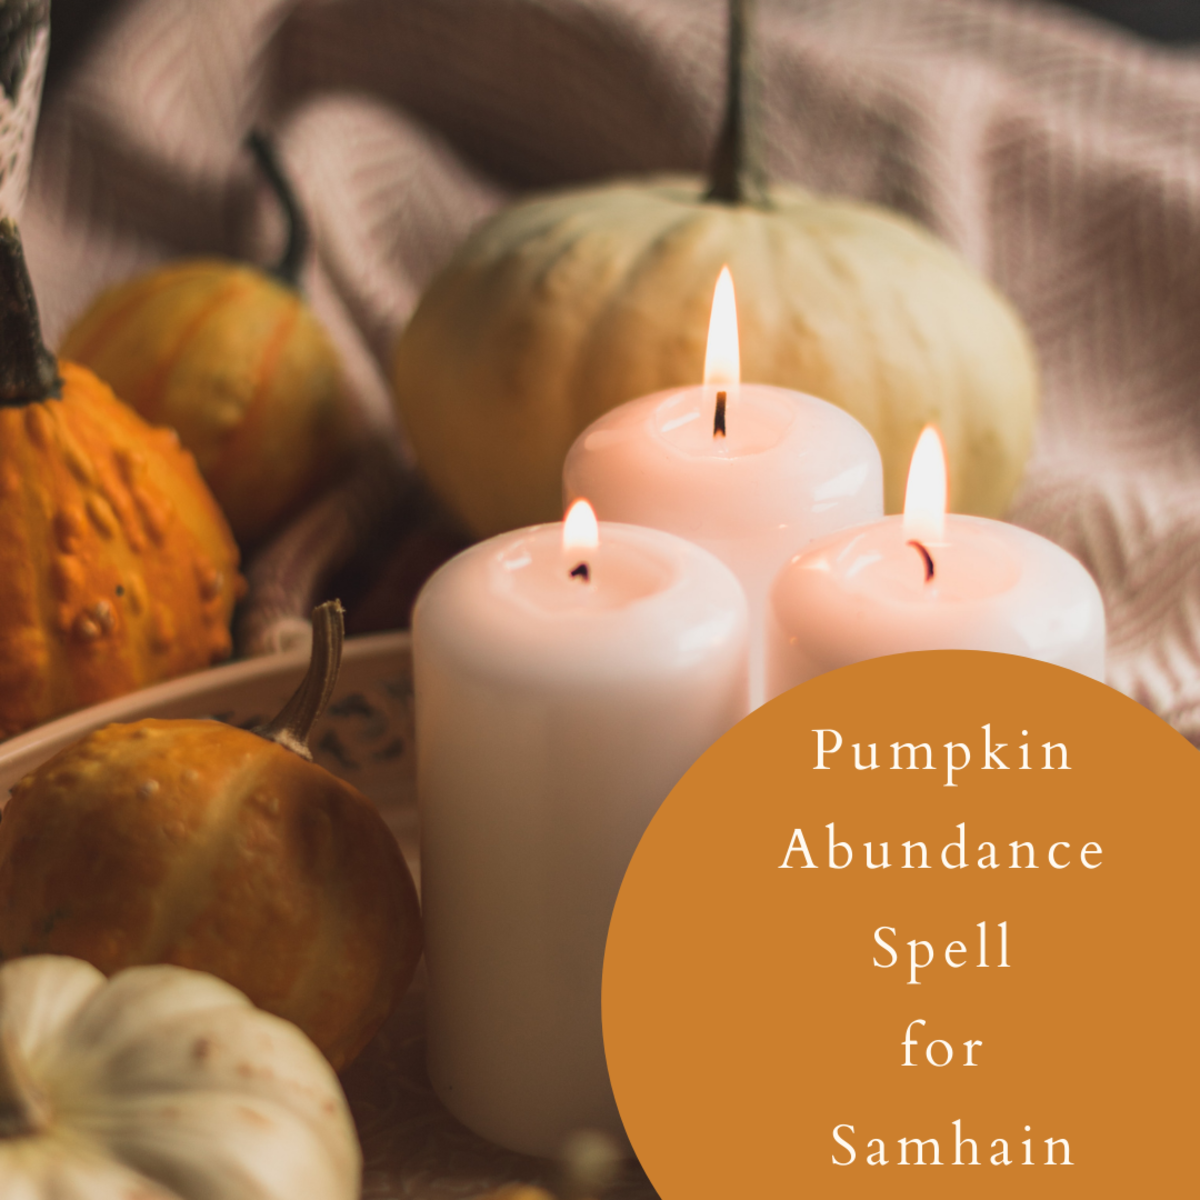 Spells for abundance are particularly powerful at Samhain.